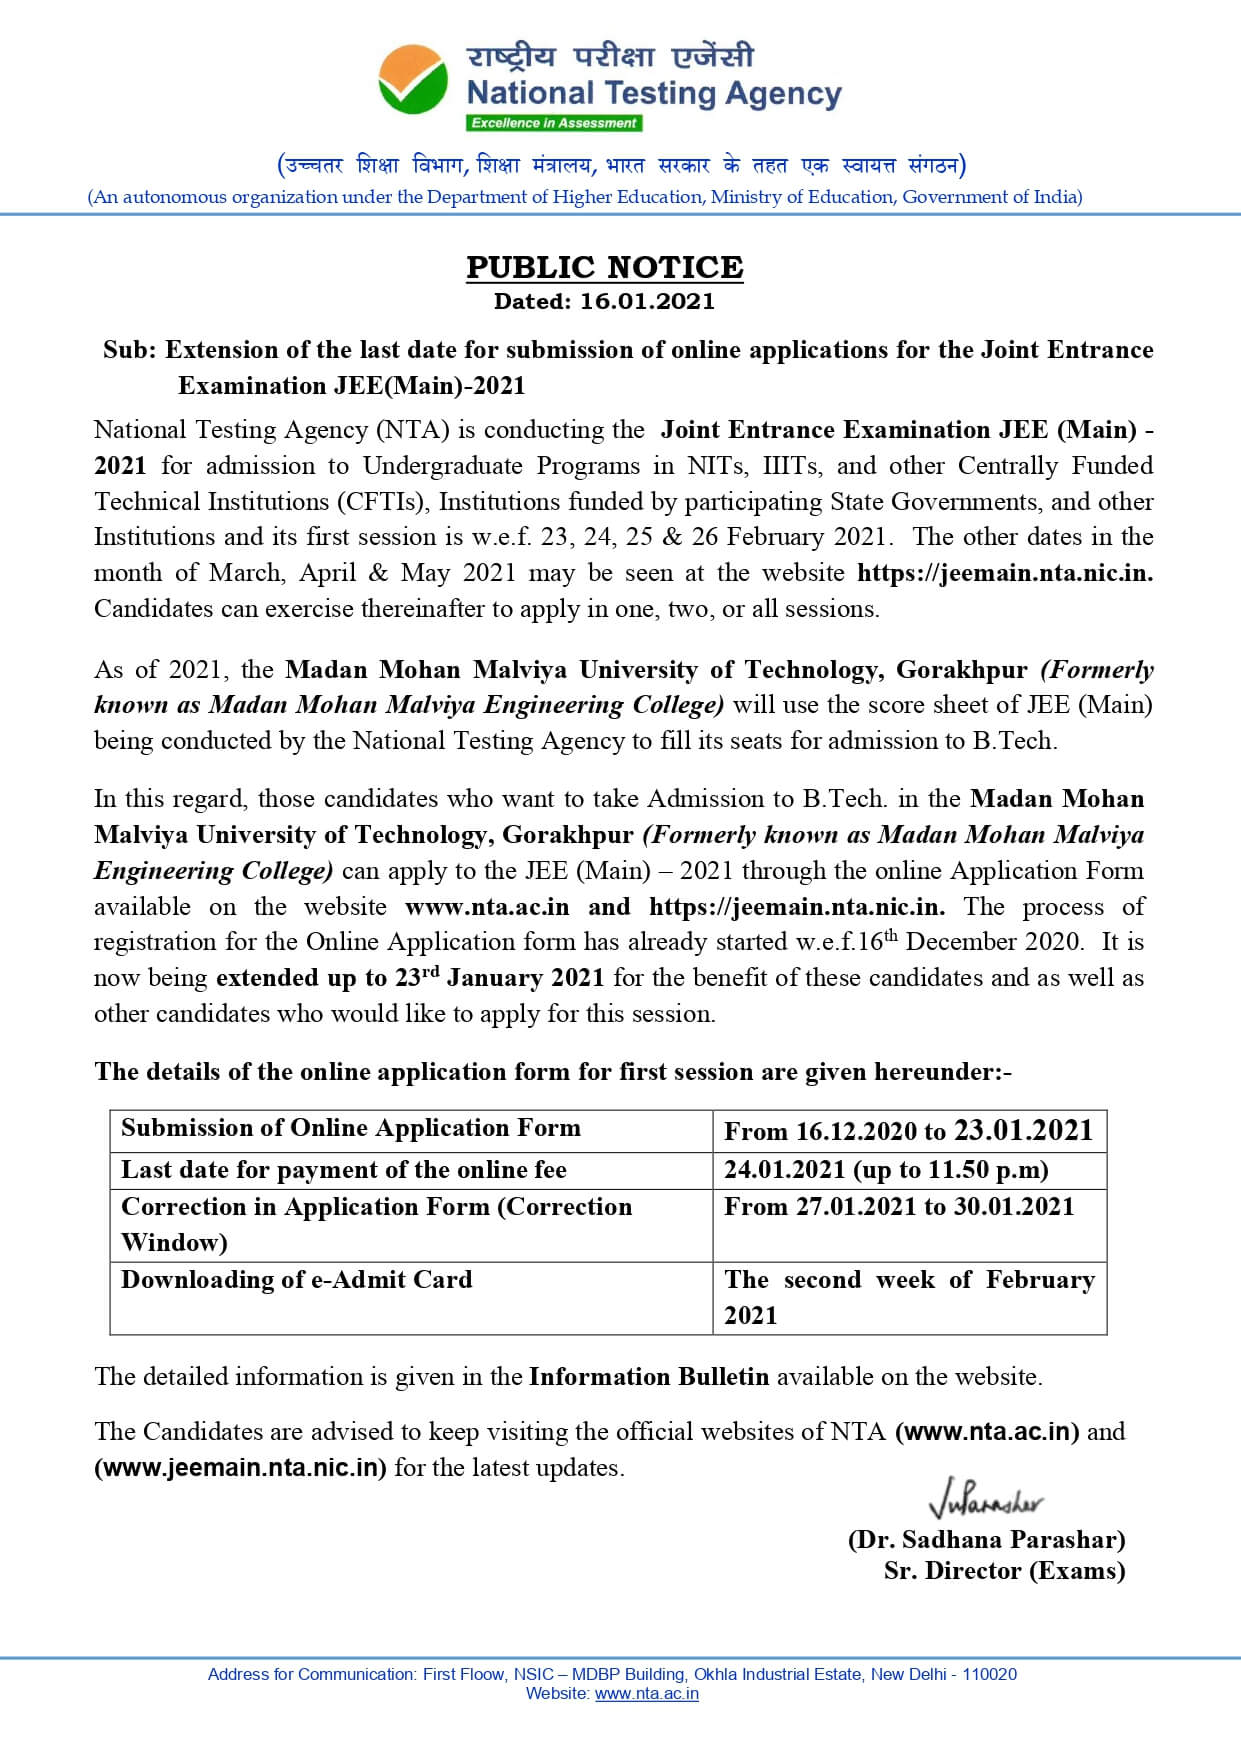 JEE Main 2021 First Session Application Extension Notice